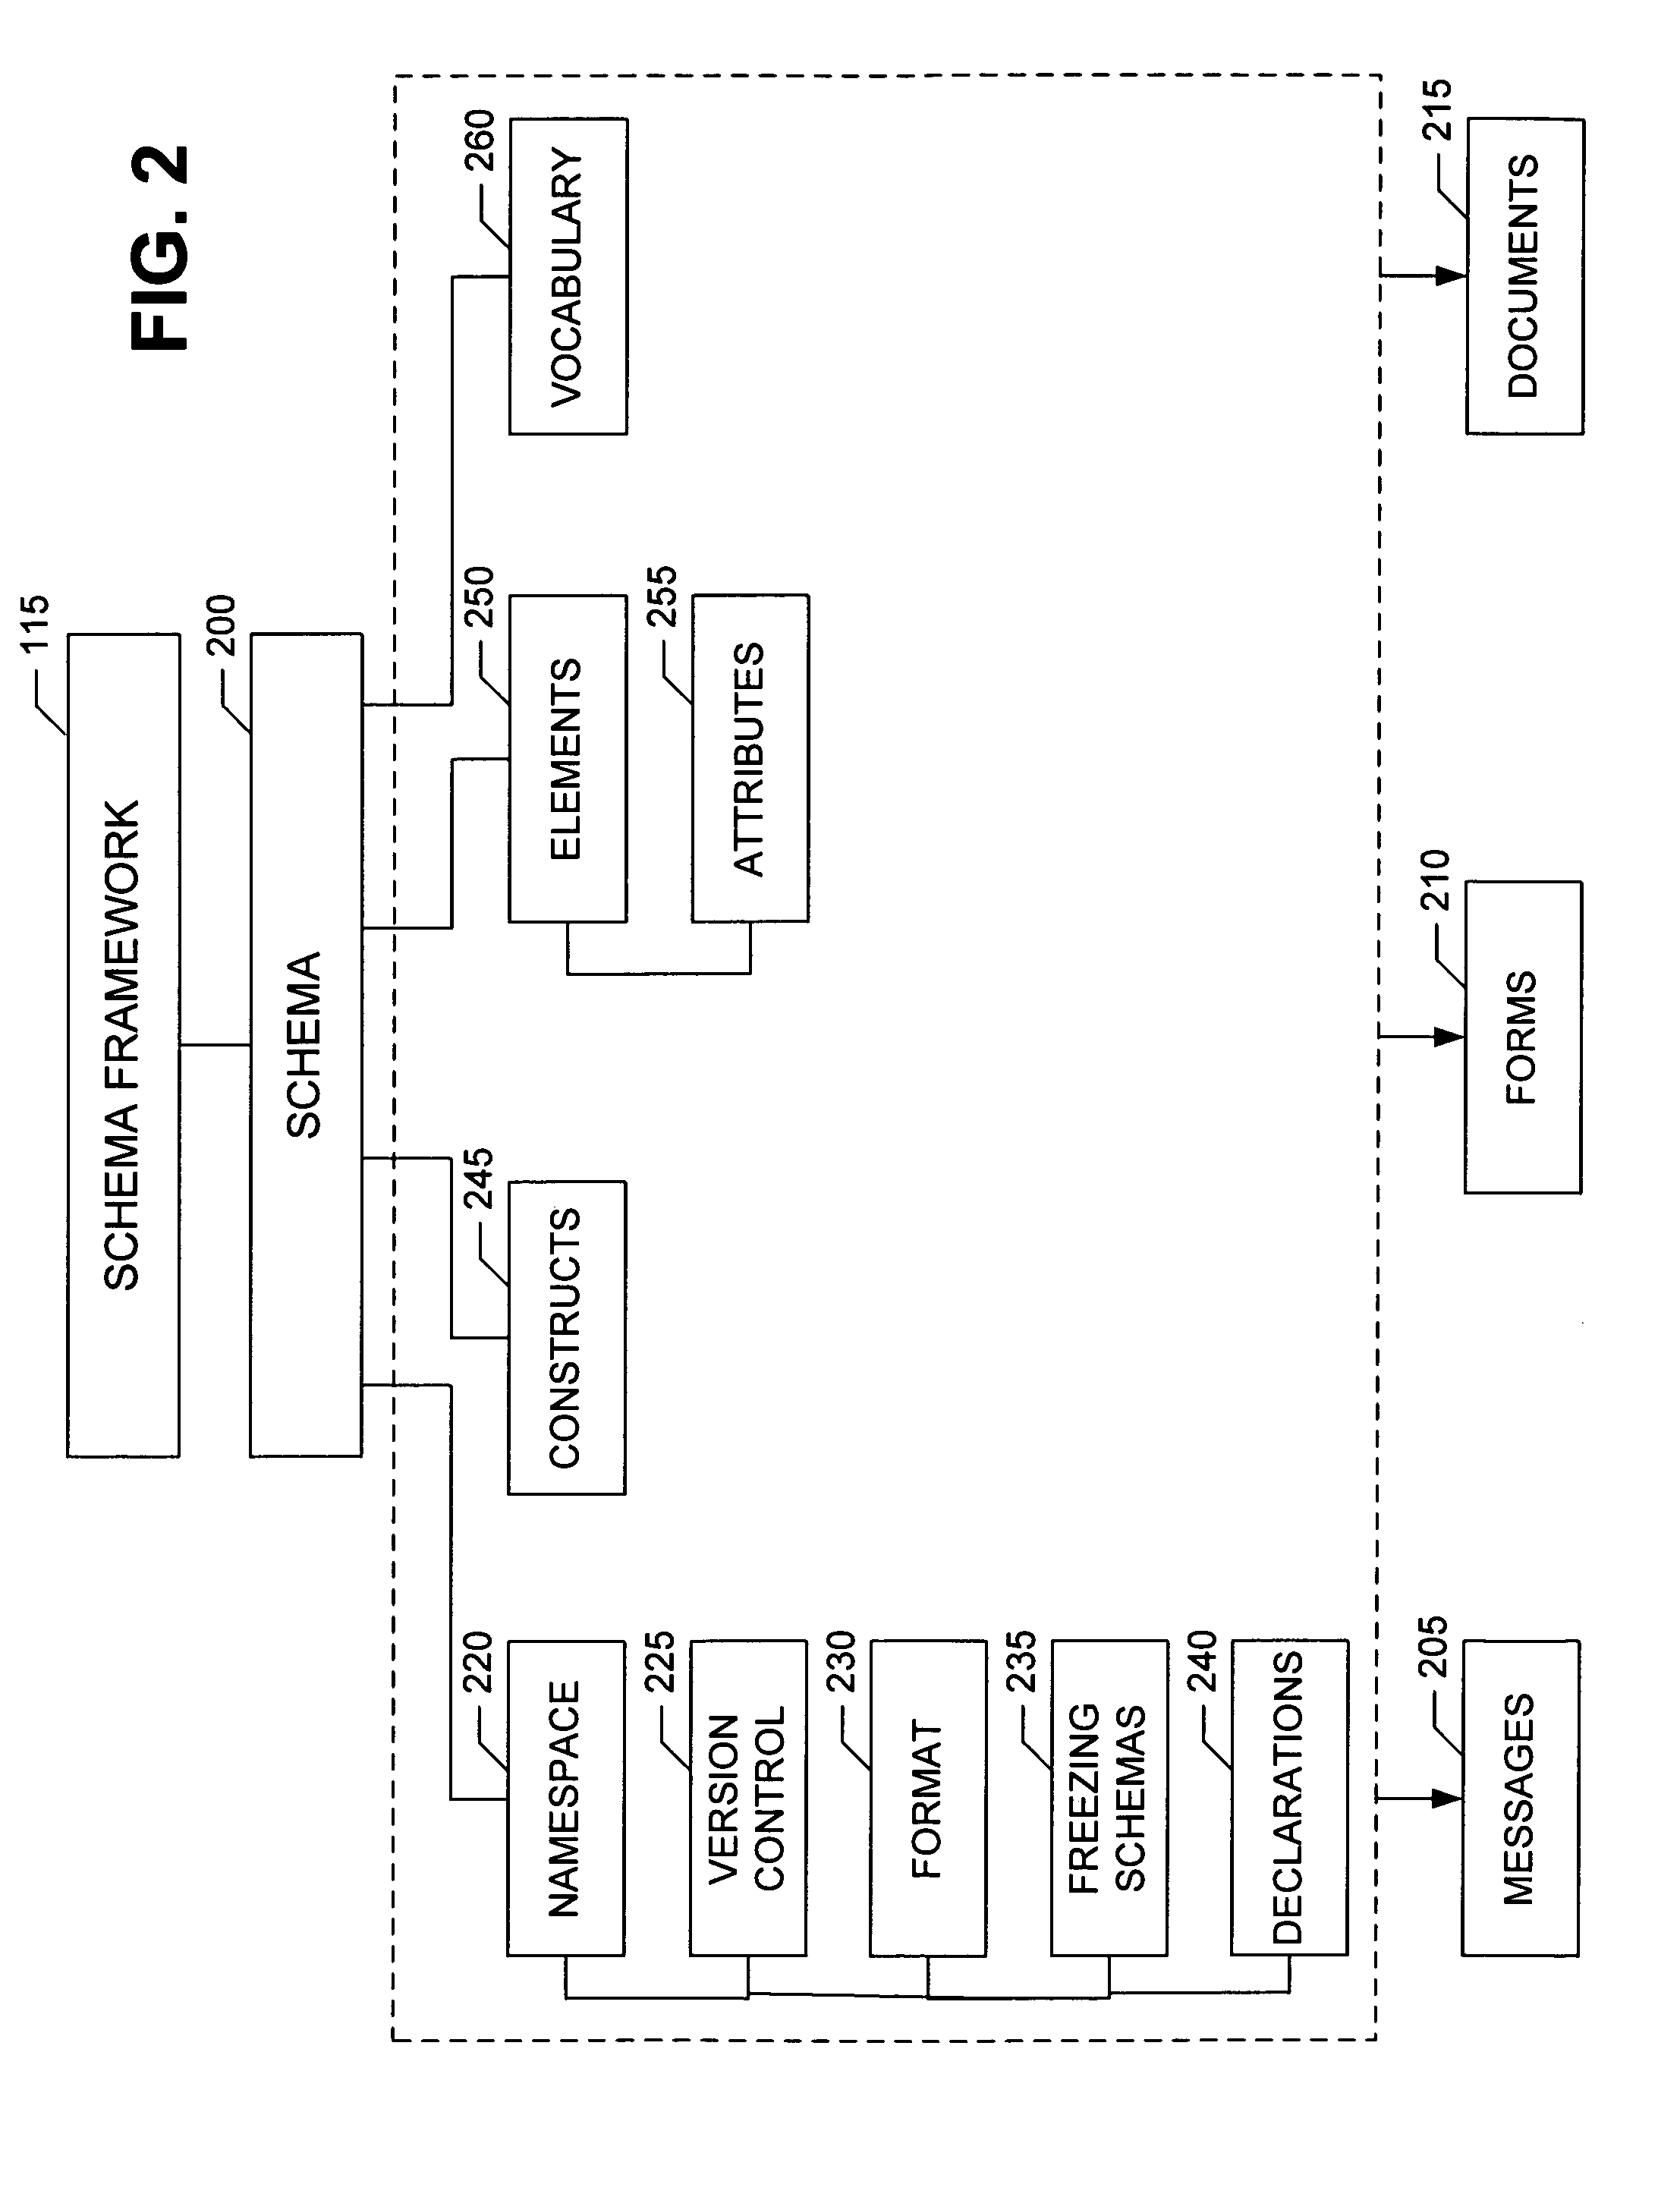 System for normalizing and archiving schemas